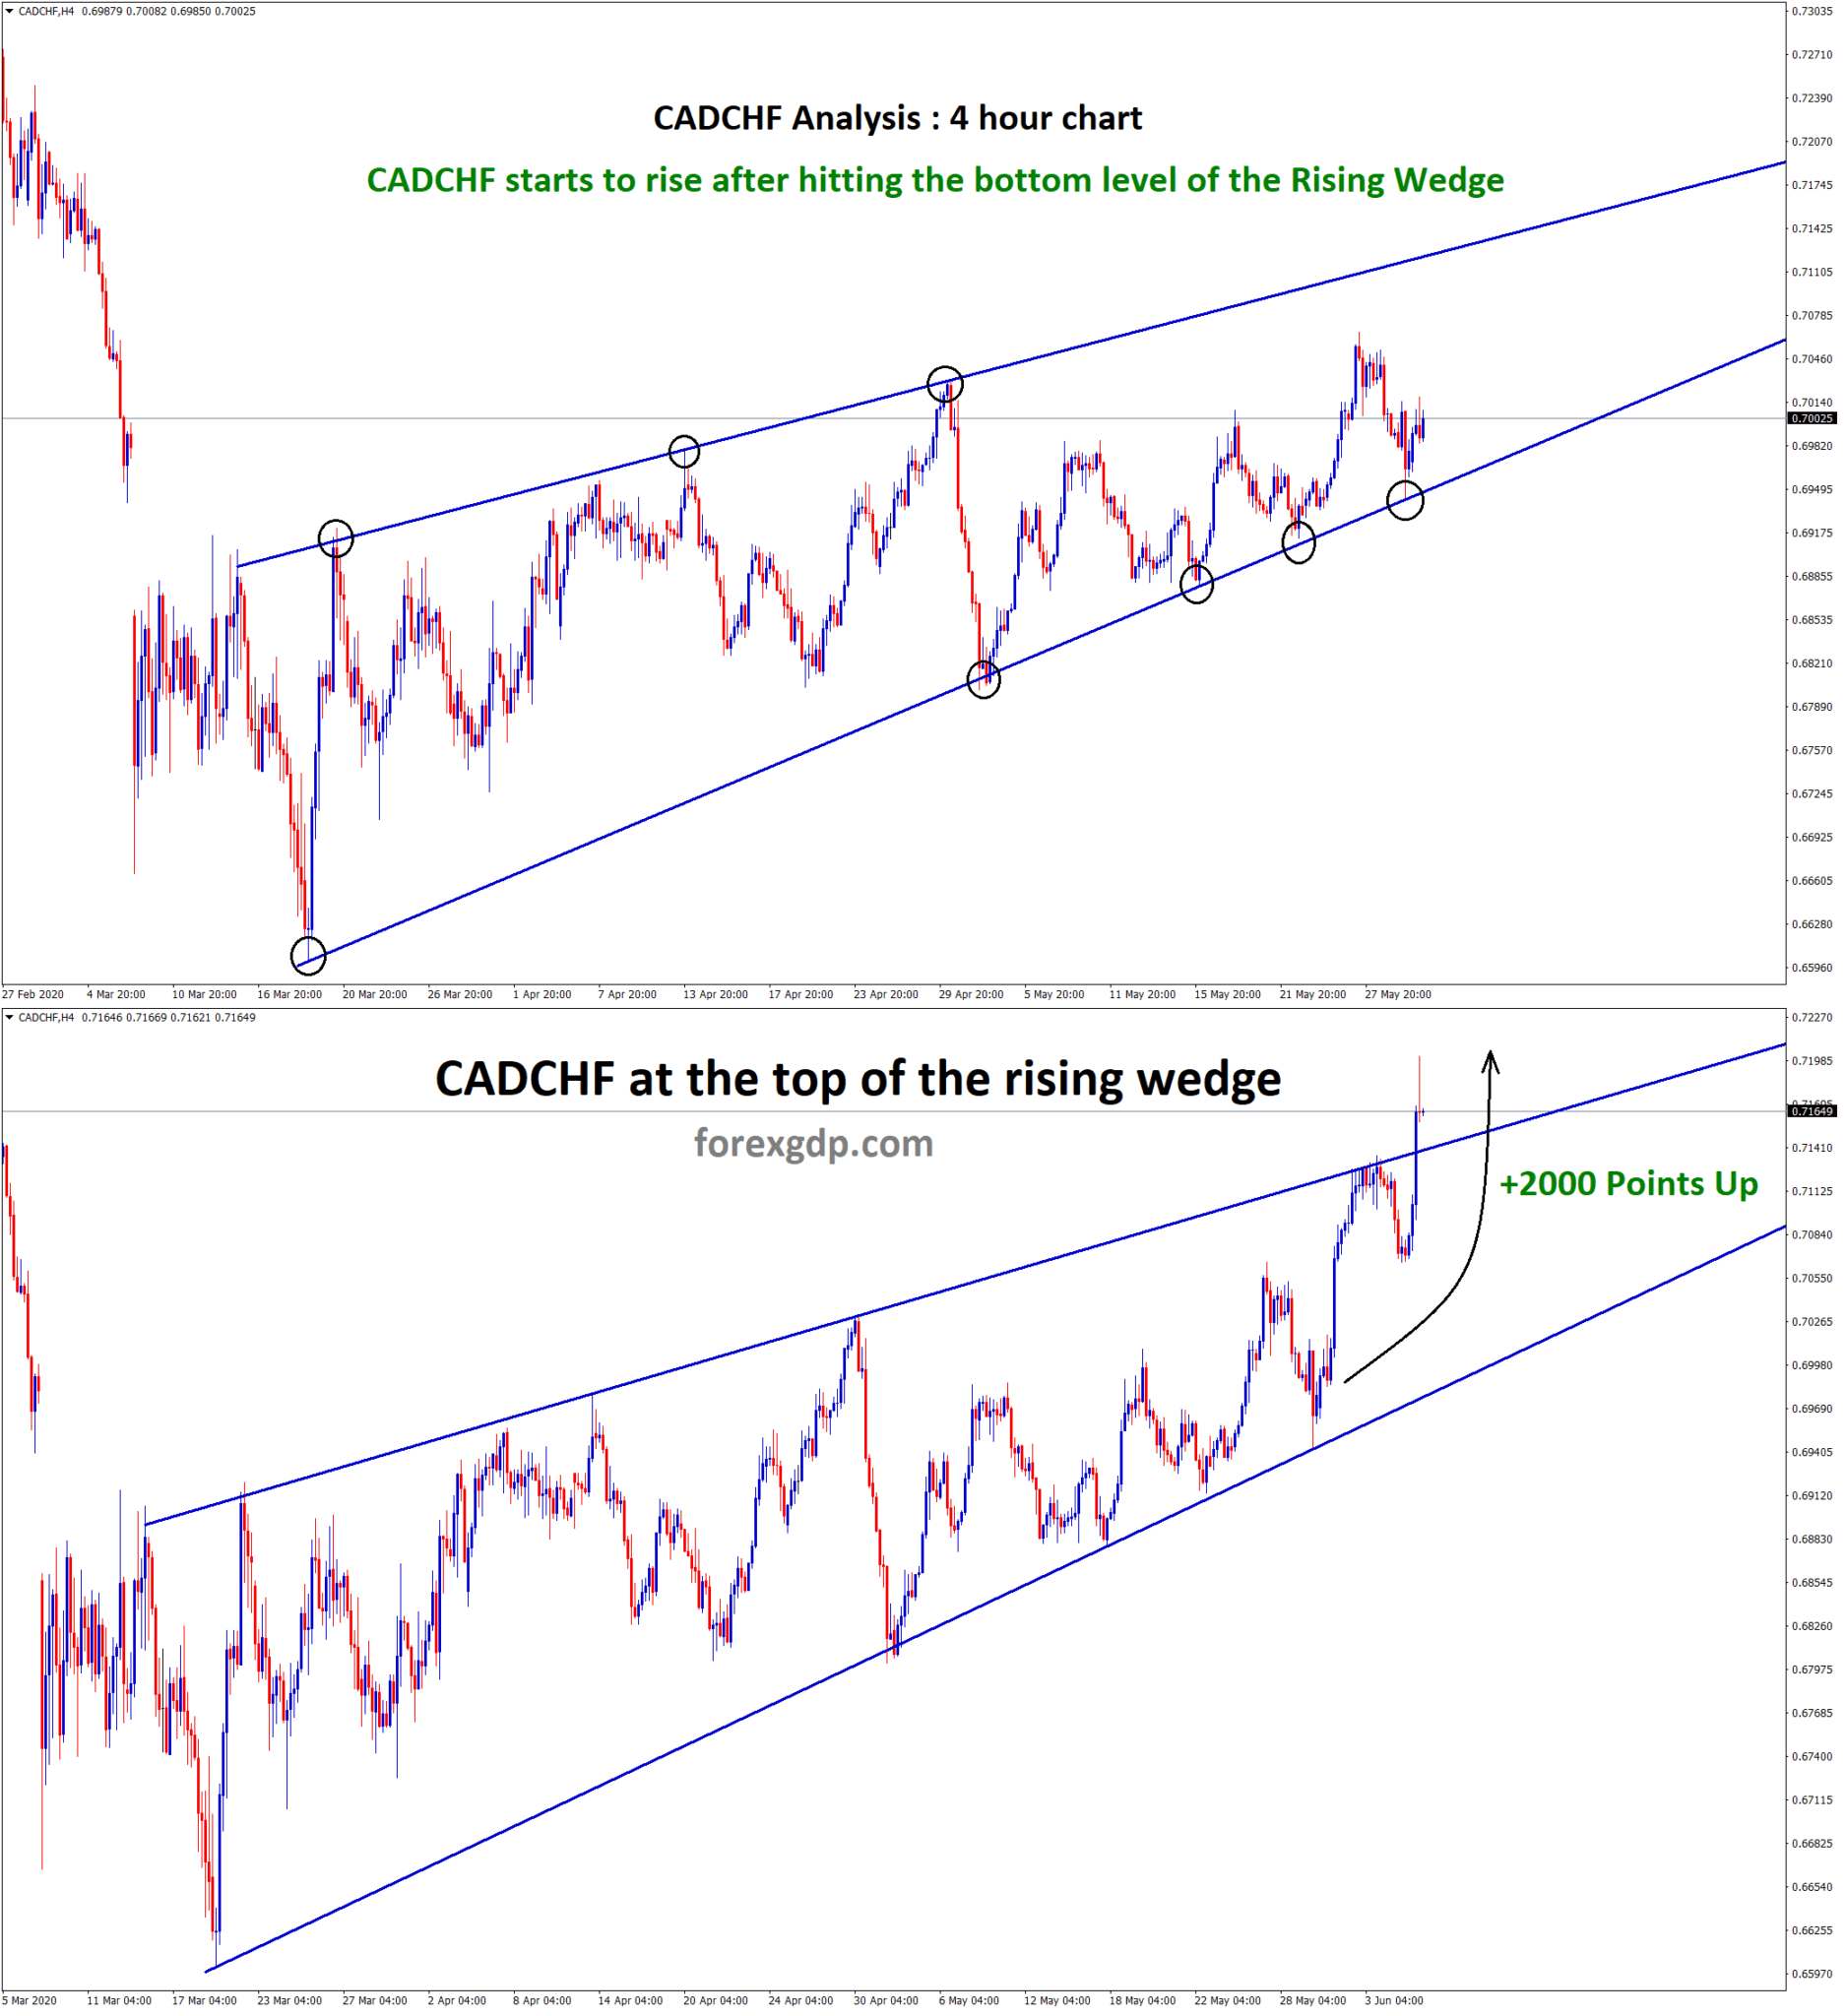 CADCHF at the top of the rising wedge now